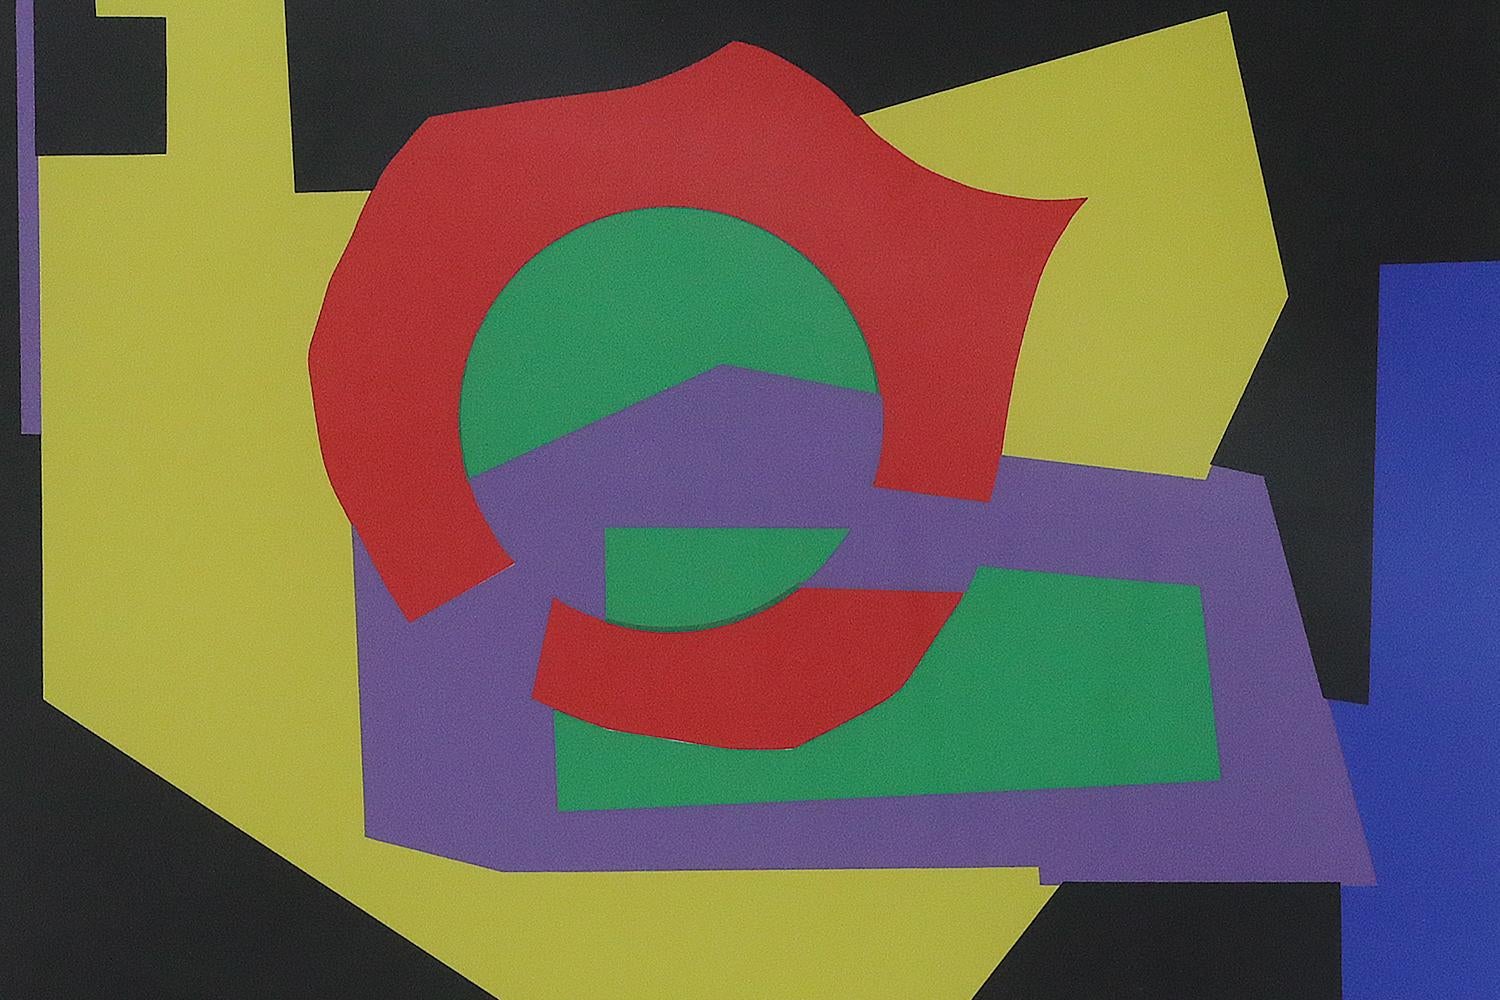 Aage Schmidt, Composition, 1987
Color lithography
Number E./T. 46/125
This work is signed by the artist, has date and an individual number (pencil)
Work dimensions 60/62
Framed work

Aage Schmidt (1931-2020) was a Danish painter and graphic artist.